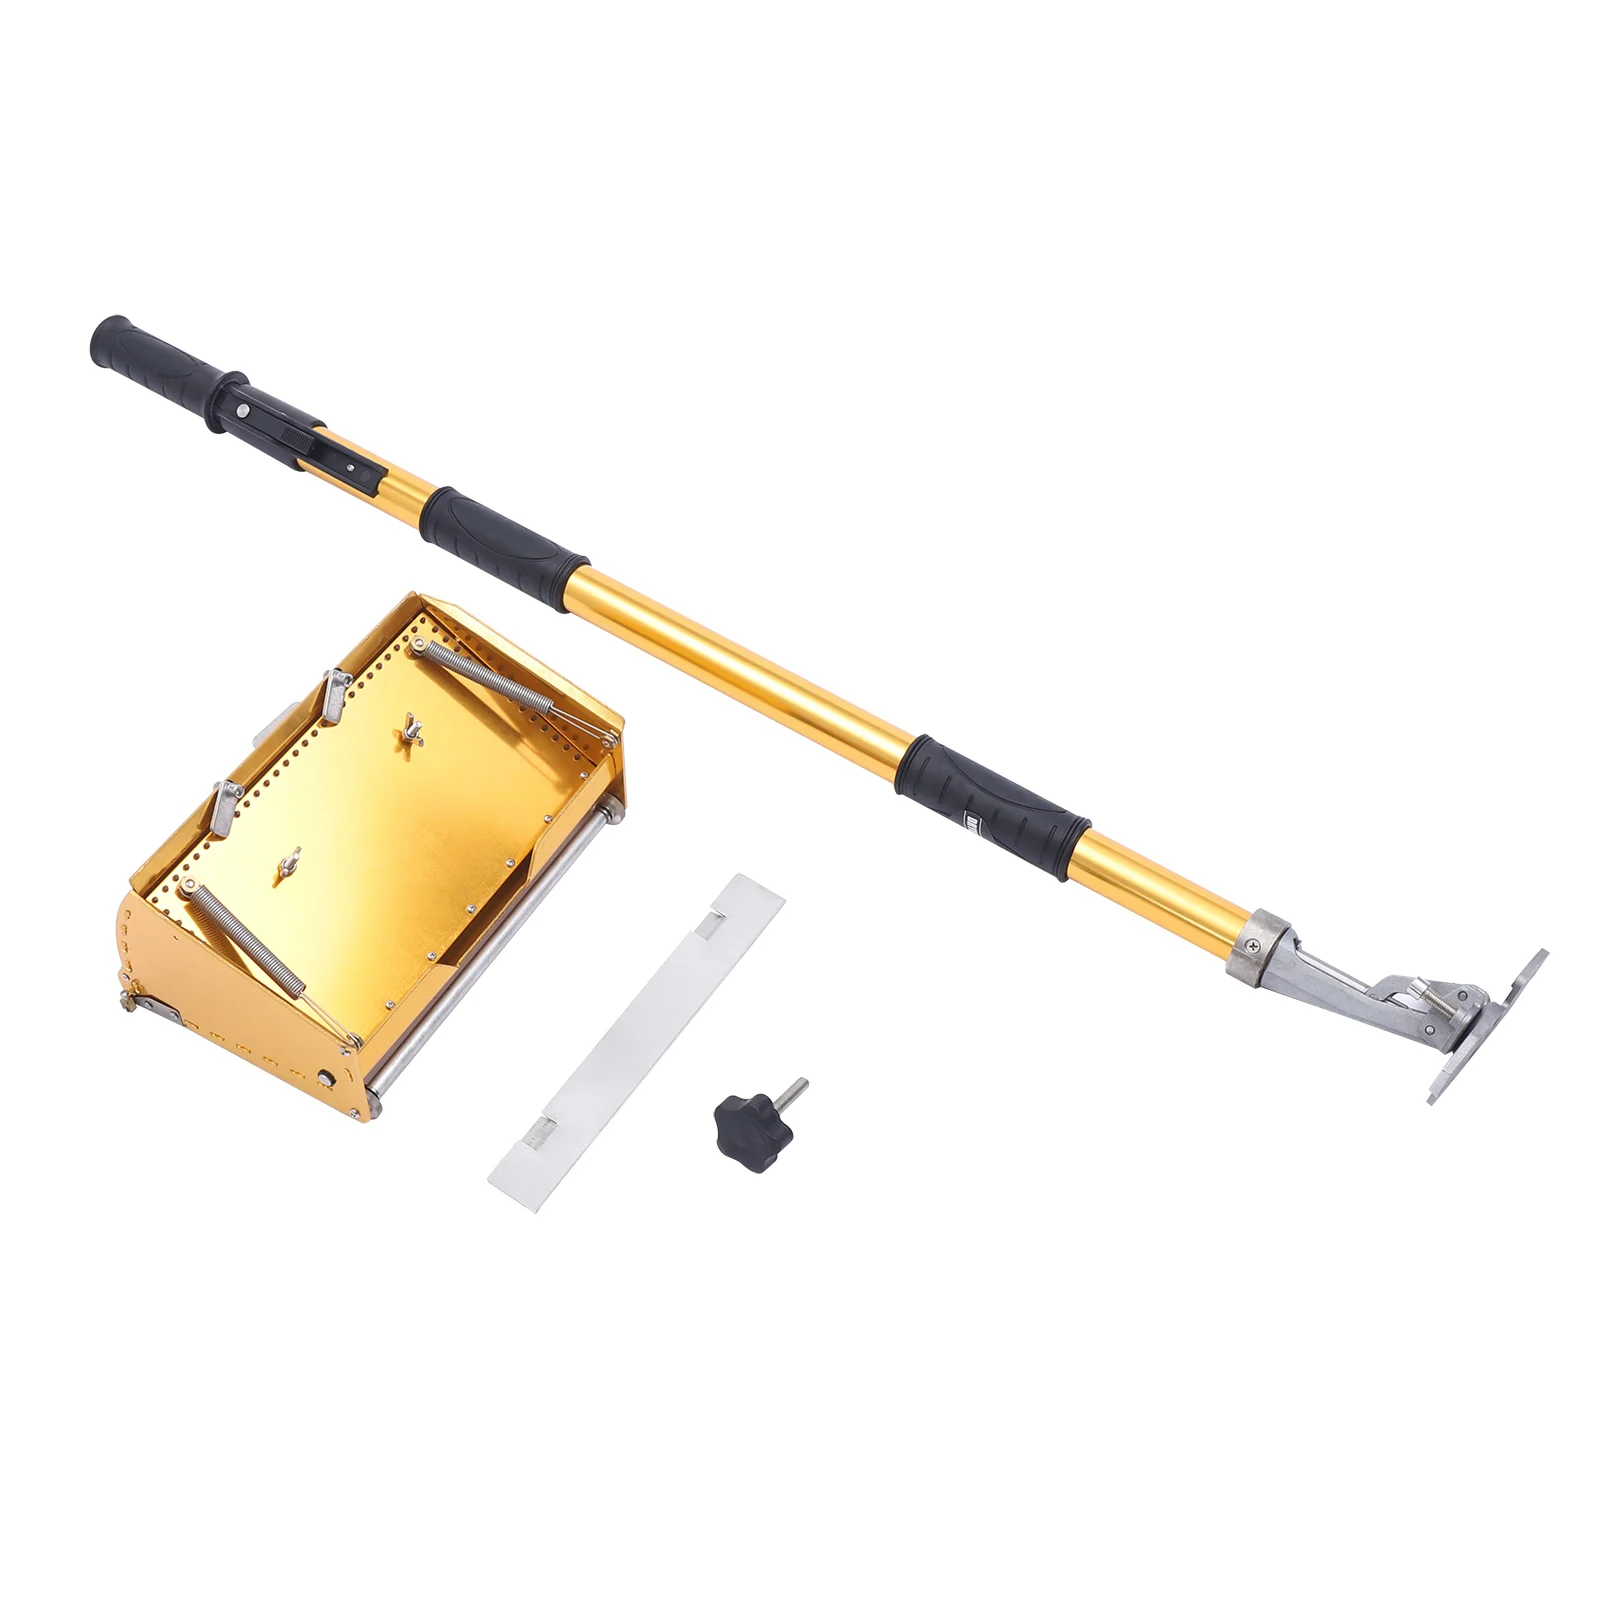 Smooth Finishing Professional Drywall Flat  Box Gold-Flat Handle-Aluminum Precision Tools-Drywall Sheetrock Cleanable